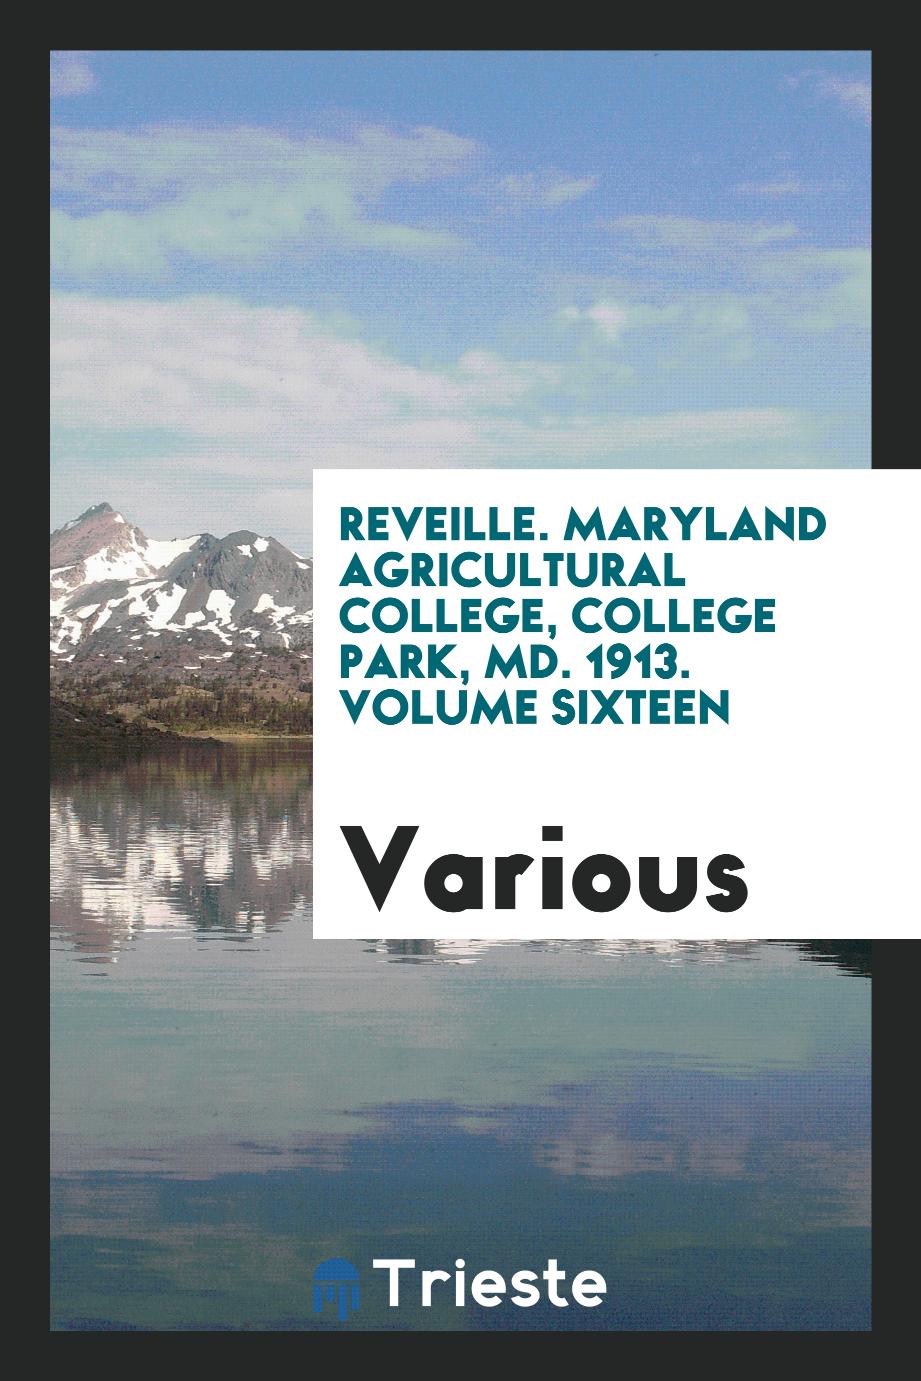 Reveille. Maryland agricultural college, college park, MD. 1913. Volume sixteen